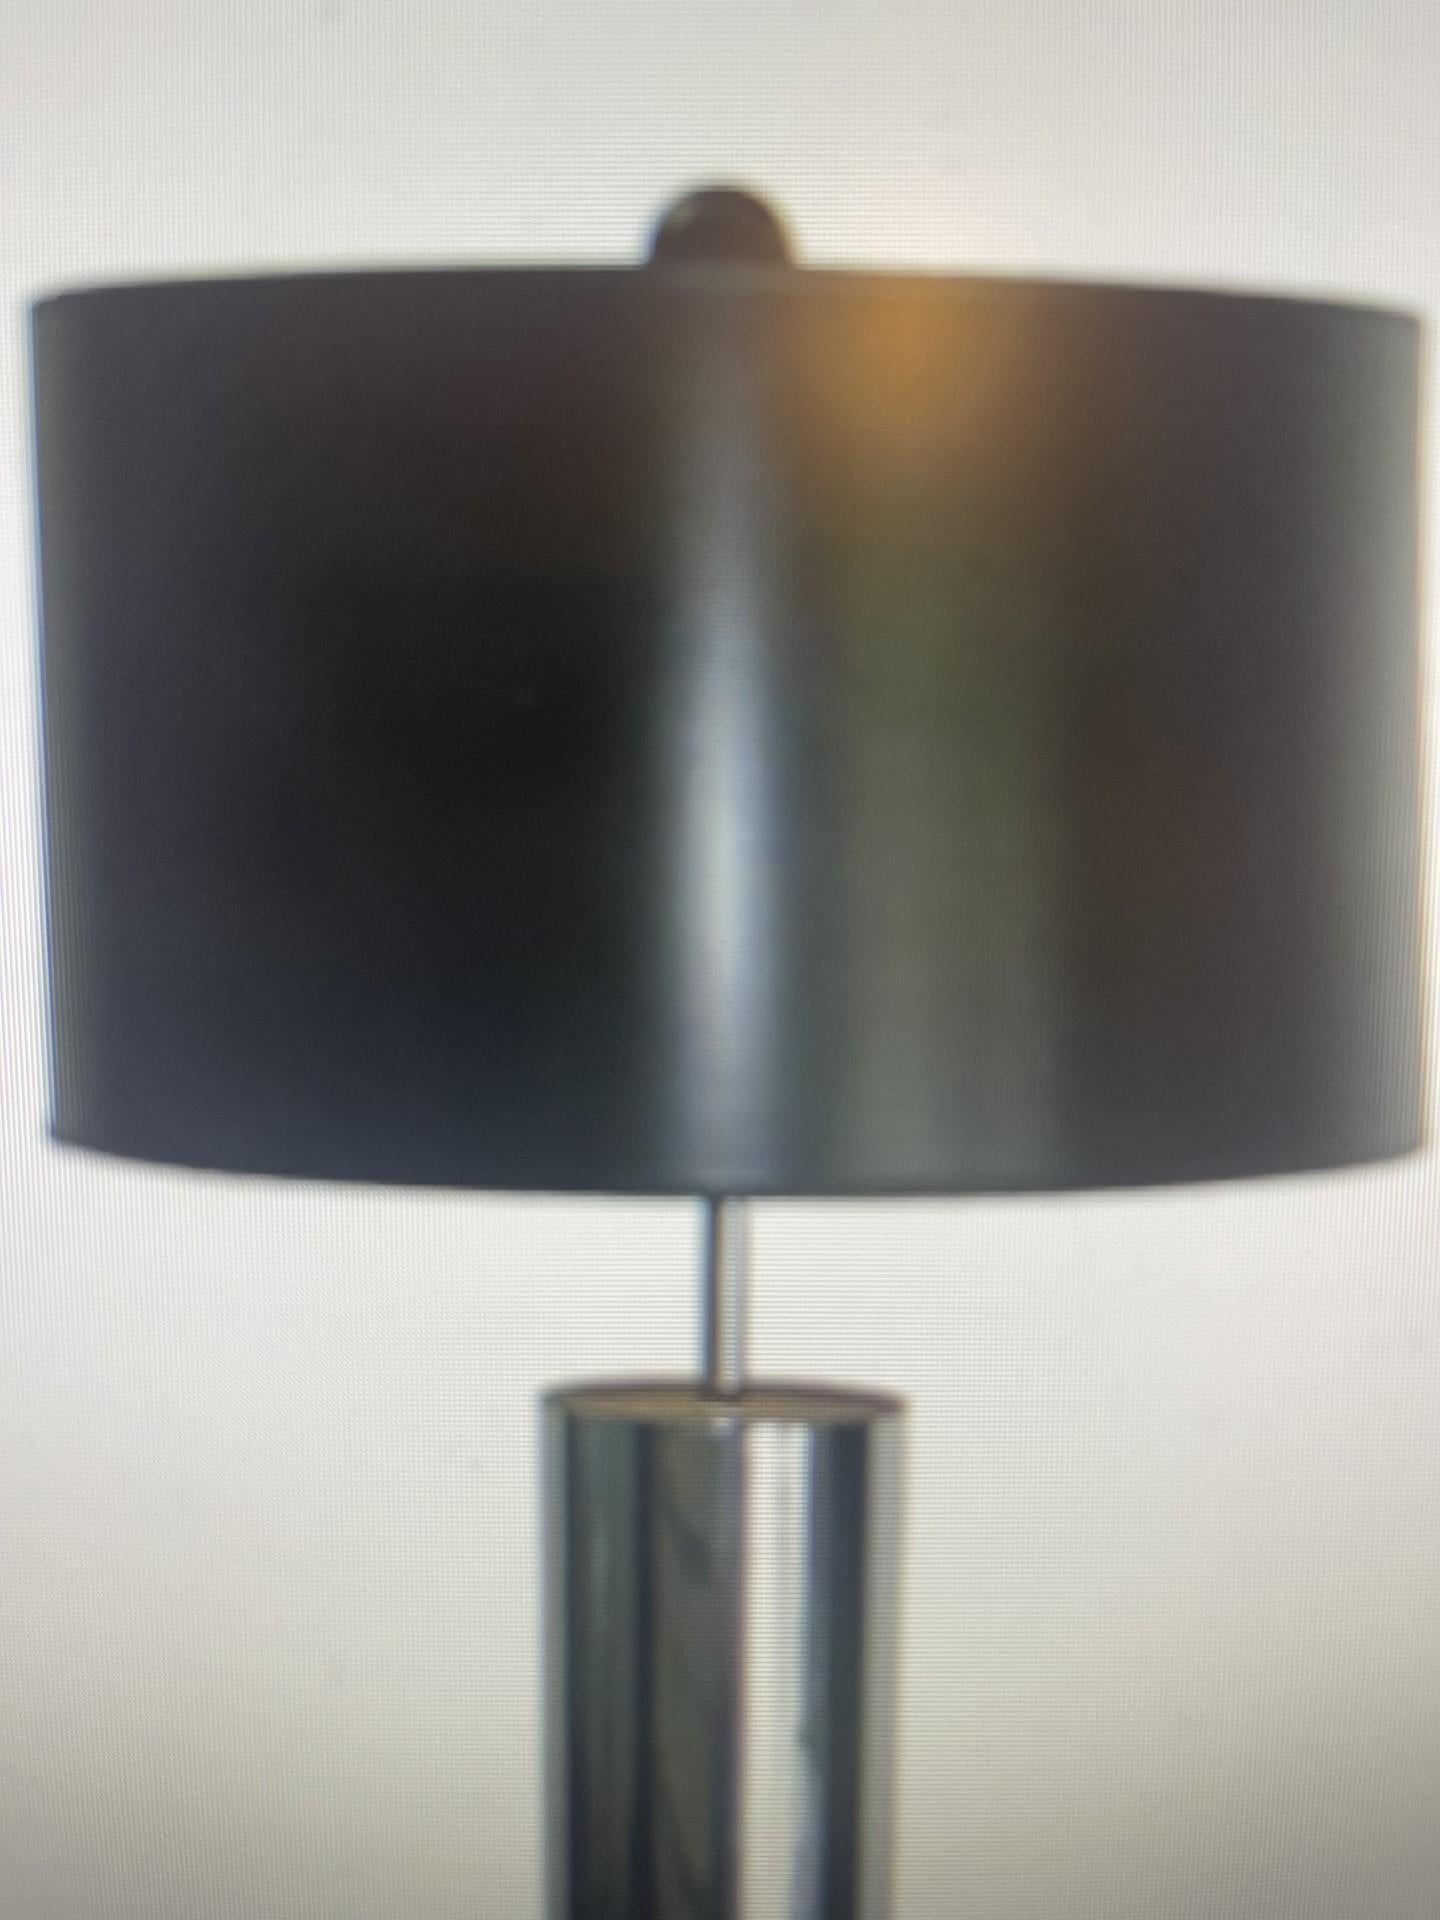  Chrome Cylinder Lamp 1980s A Trend returning. In Excellent Condition For Sale In Bellport, NY